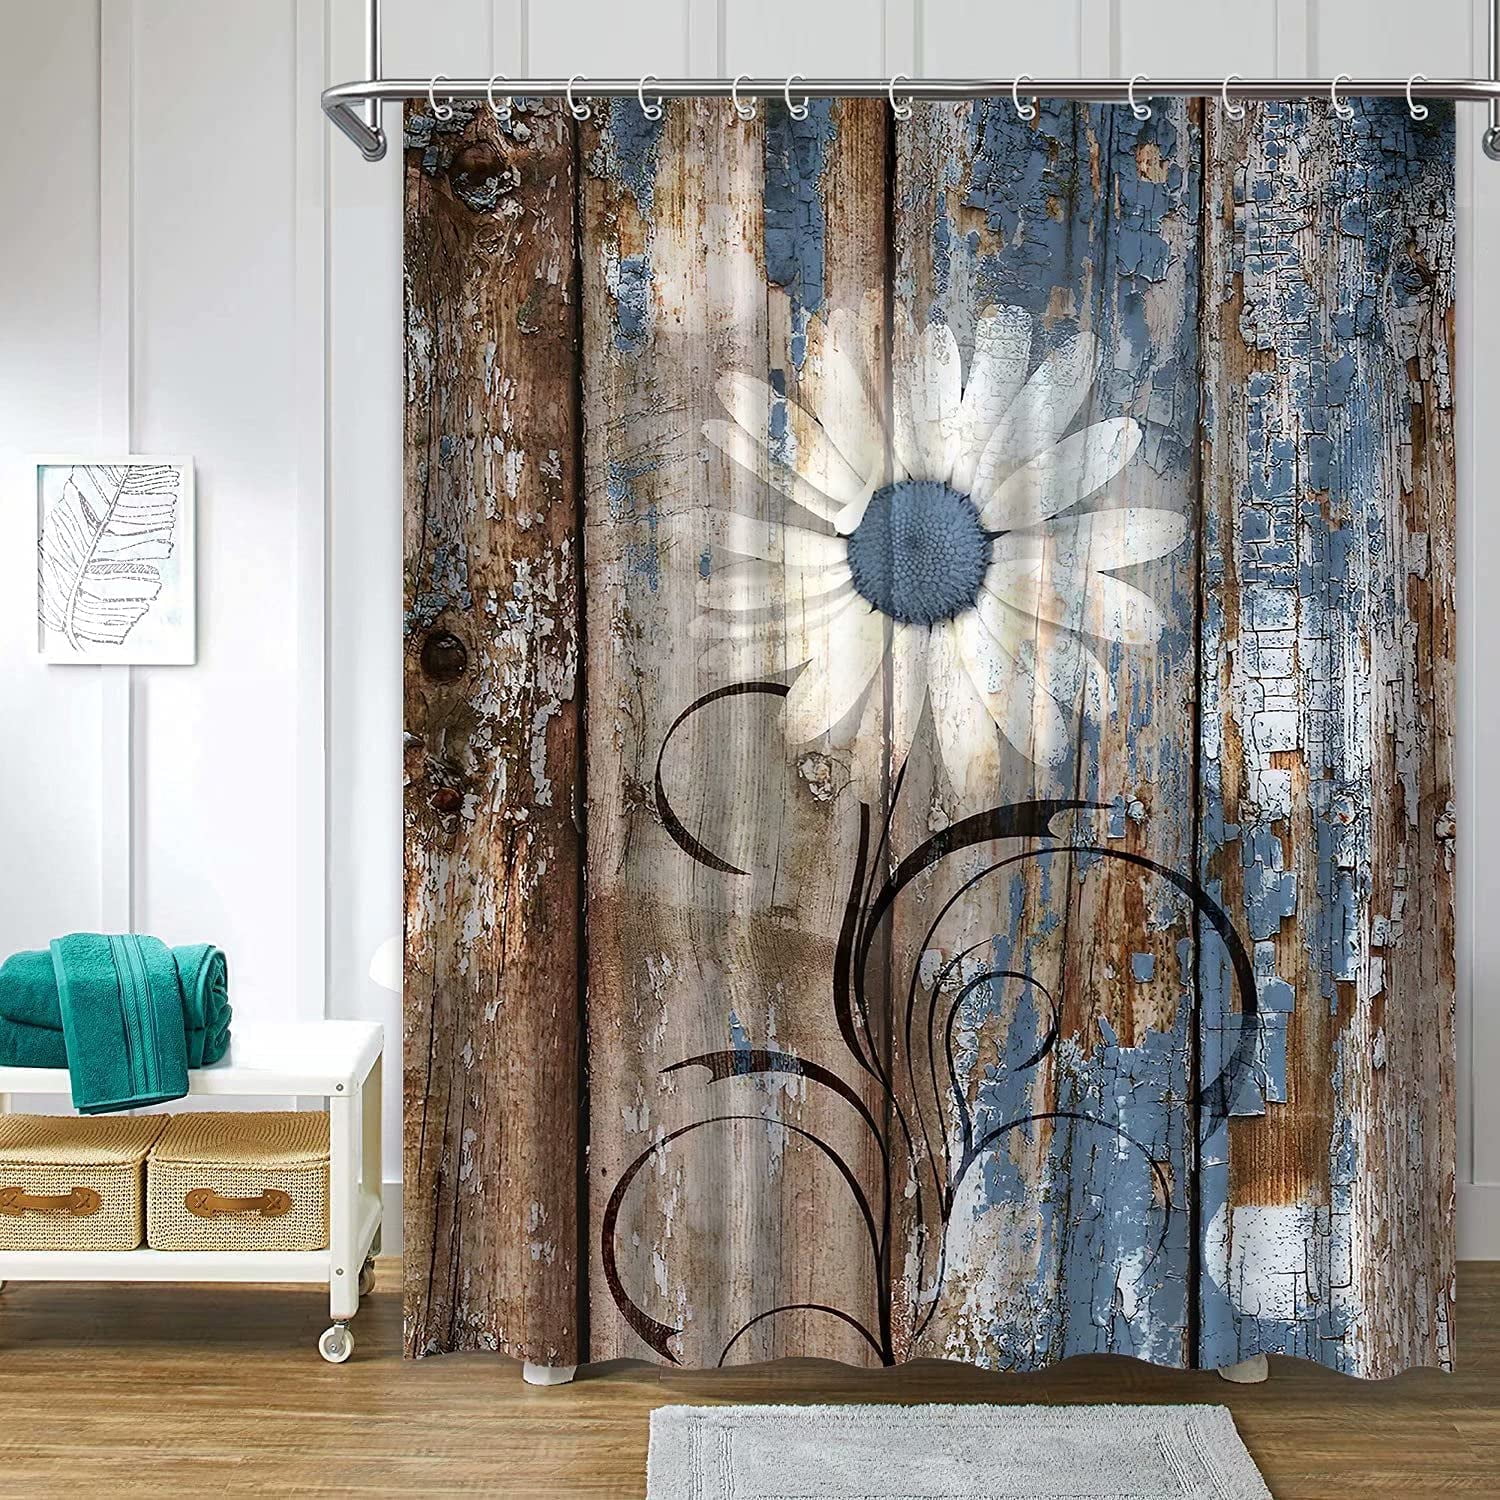 Assembled Old Planks 3D Shower Curtain Waterproof Fabric Bathroom Decoration 